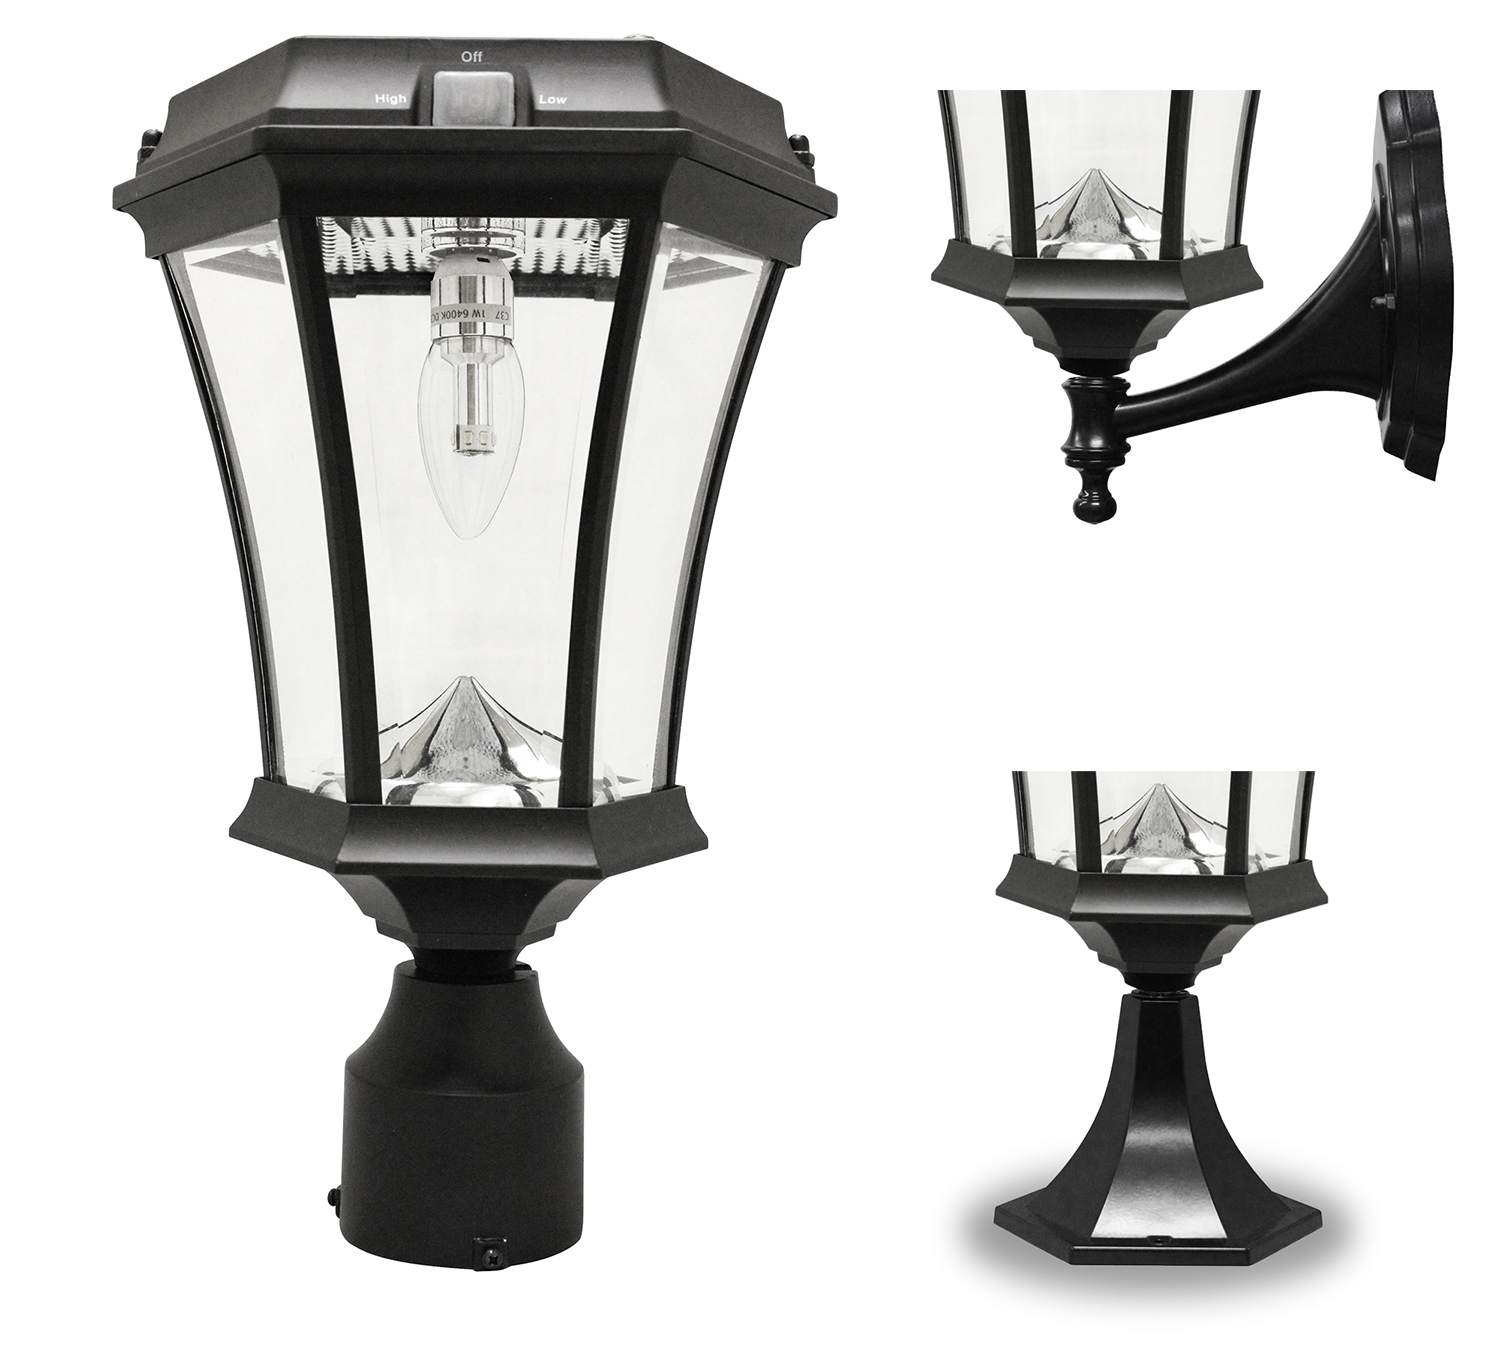 Gama Sonic Victorian Solar Light, GS Solar Light Bulb, with Wall,Post,Fitter Mounts, GS-94B-FPW